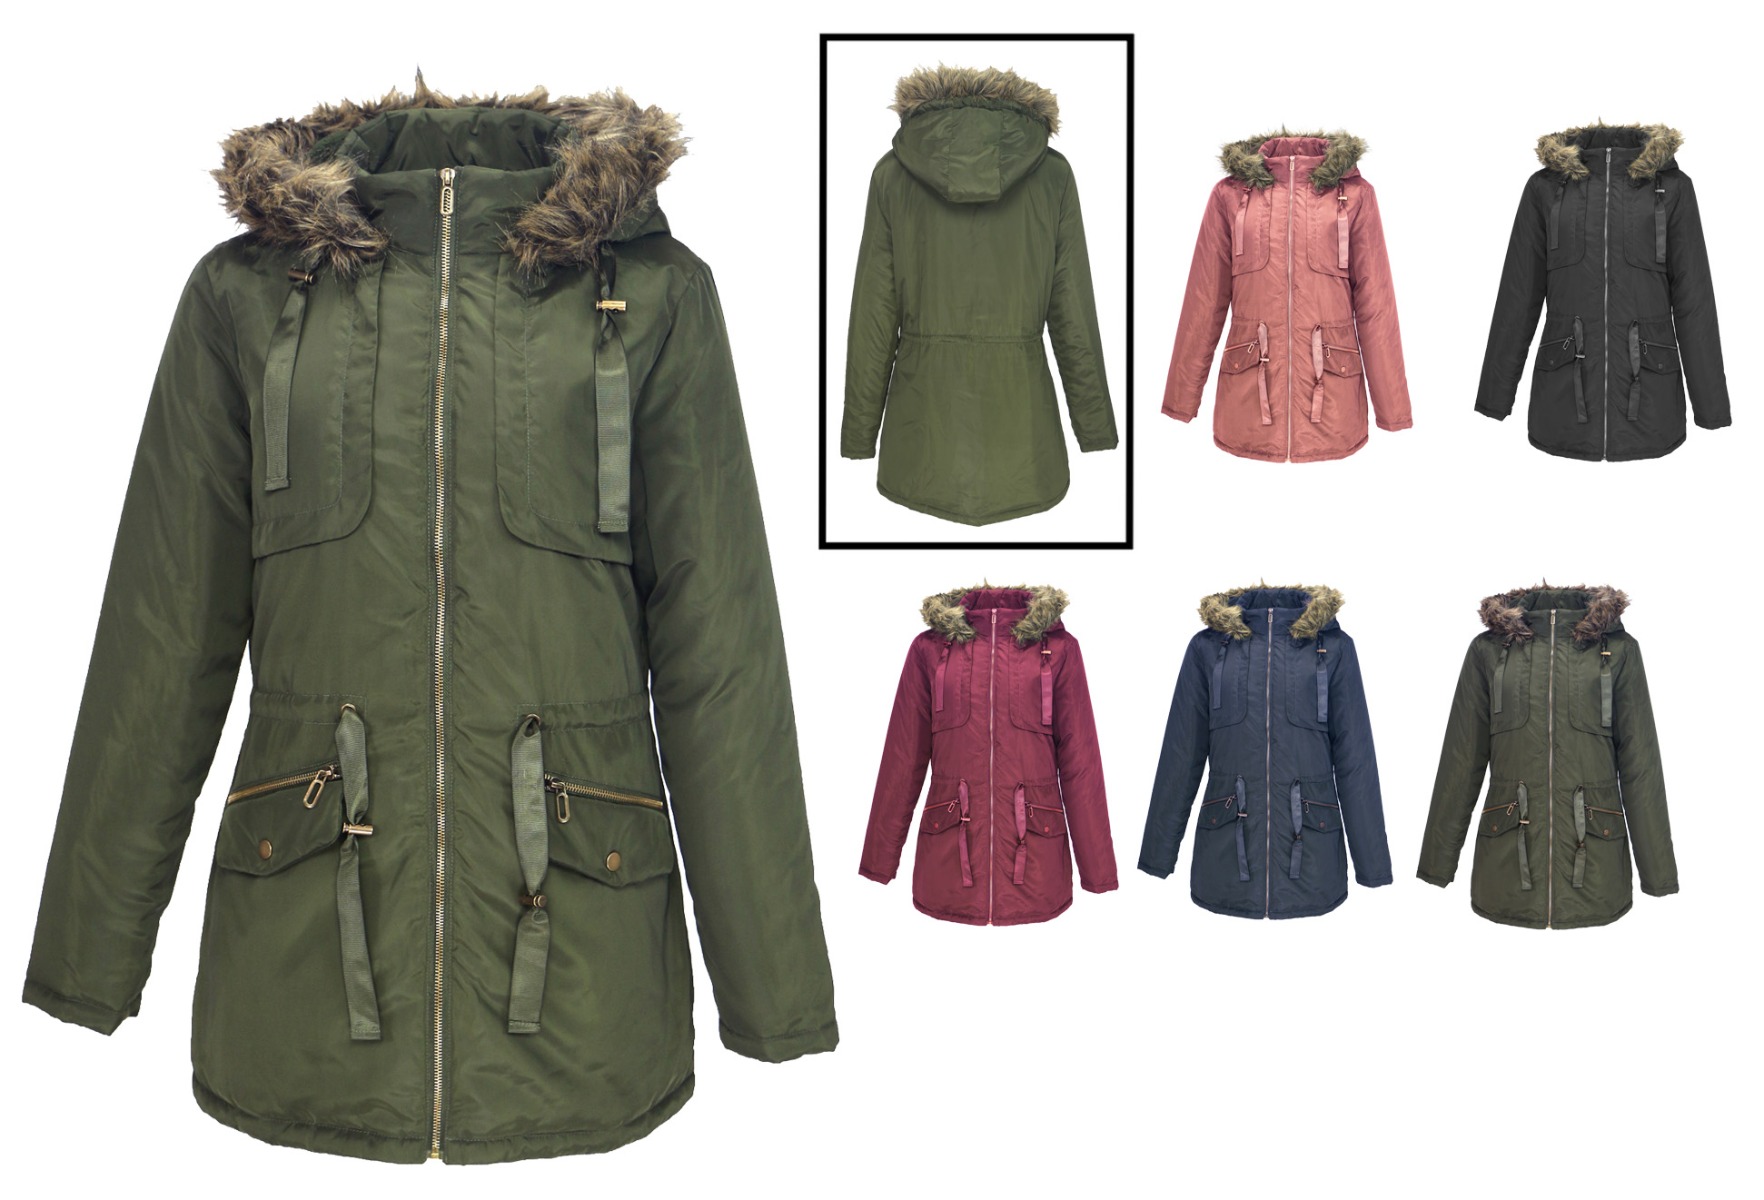 Women's Sherpa Lined Winter JACKETs w/ Detachable Hood & Pockets - Choose Your Color(s)